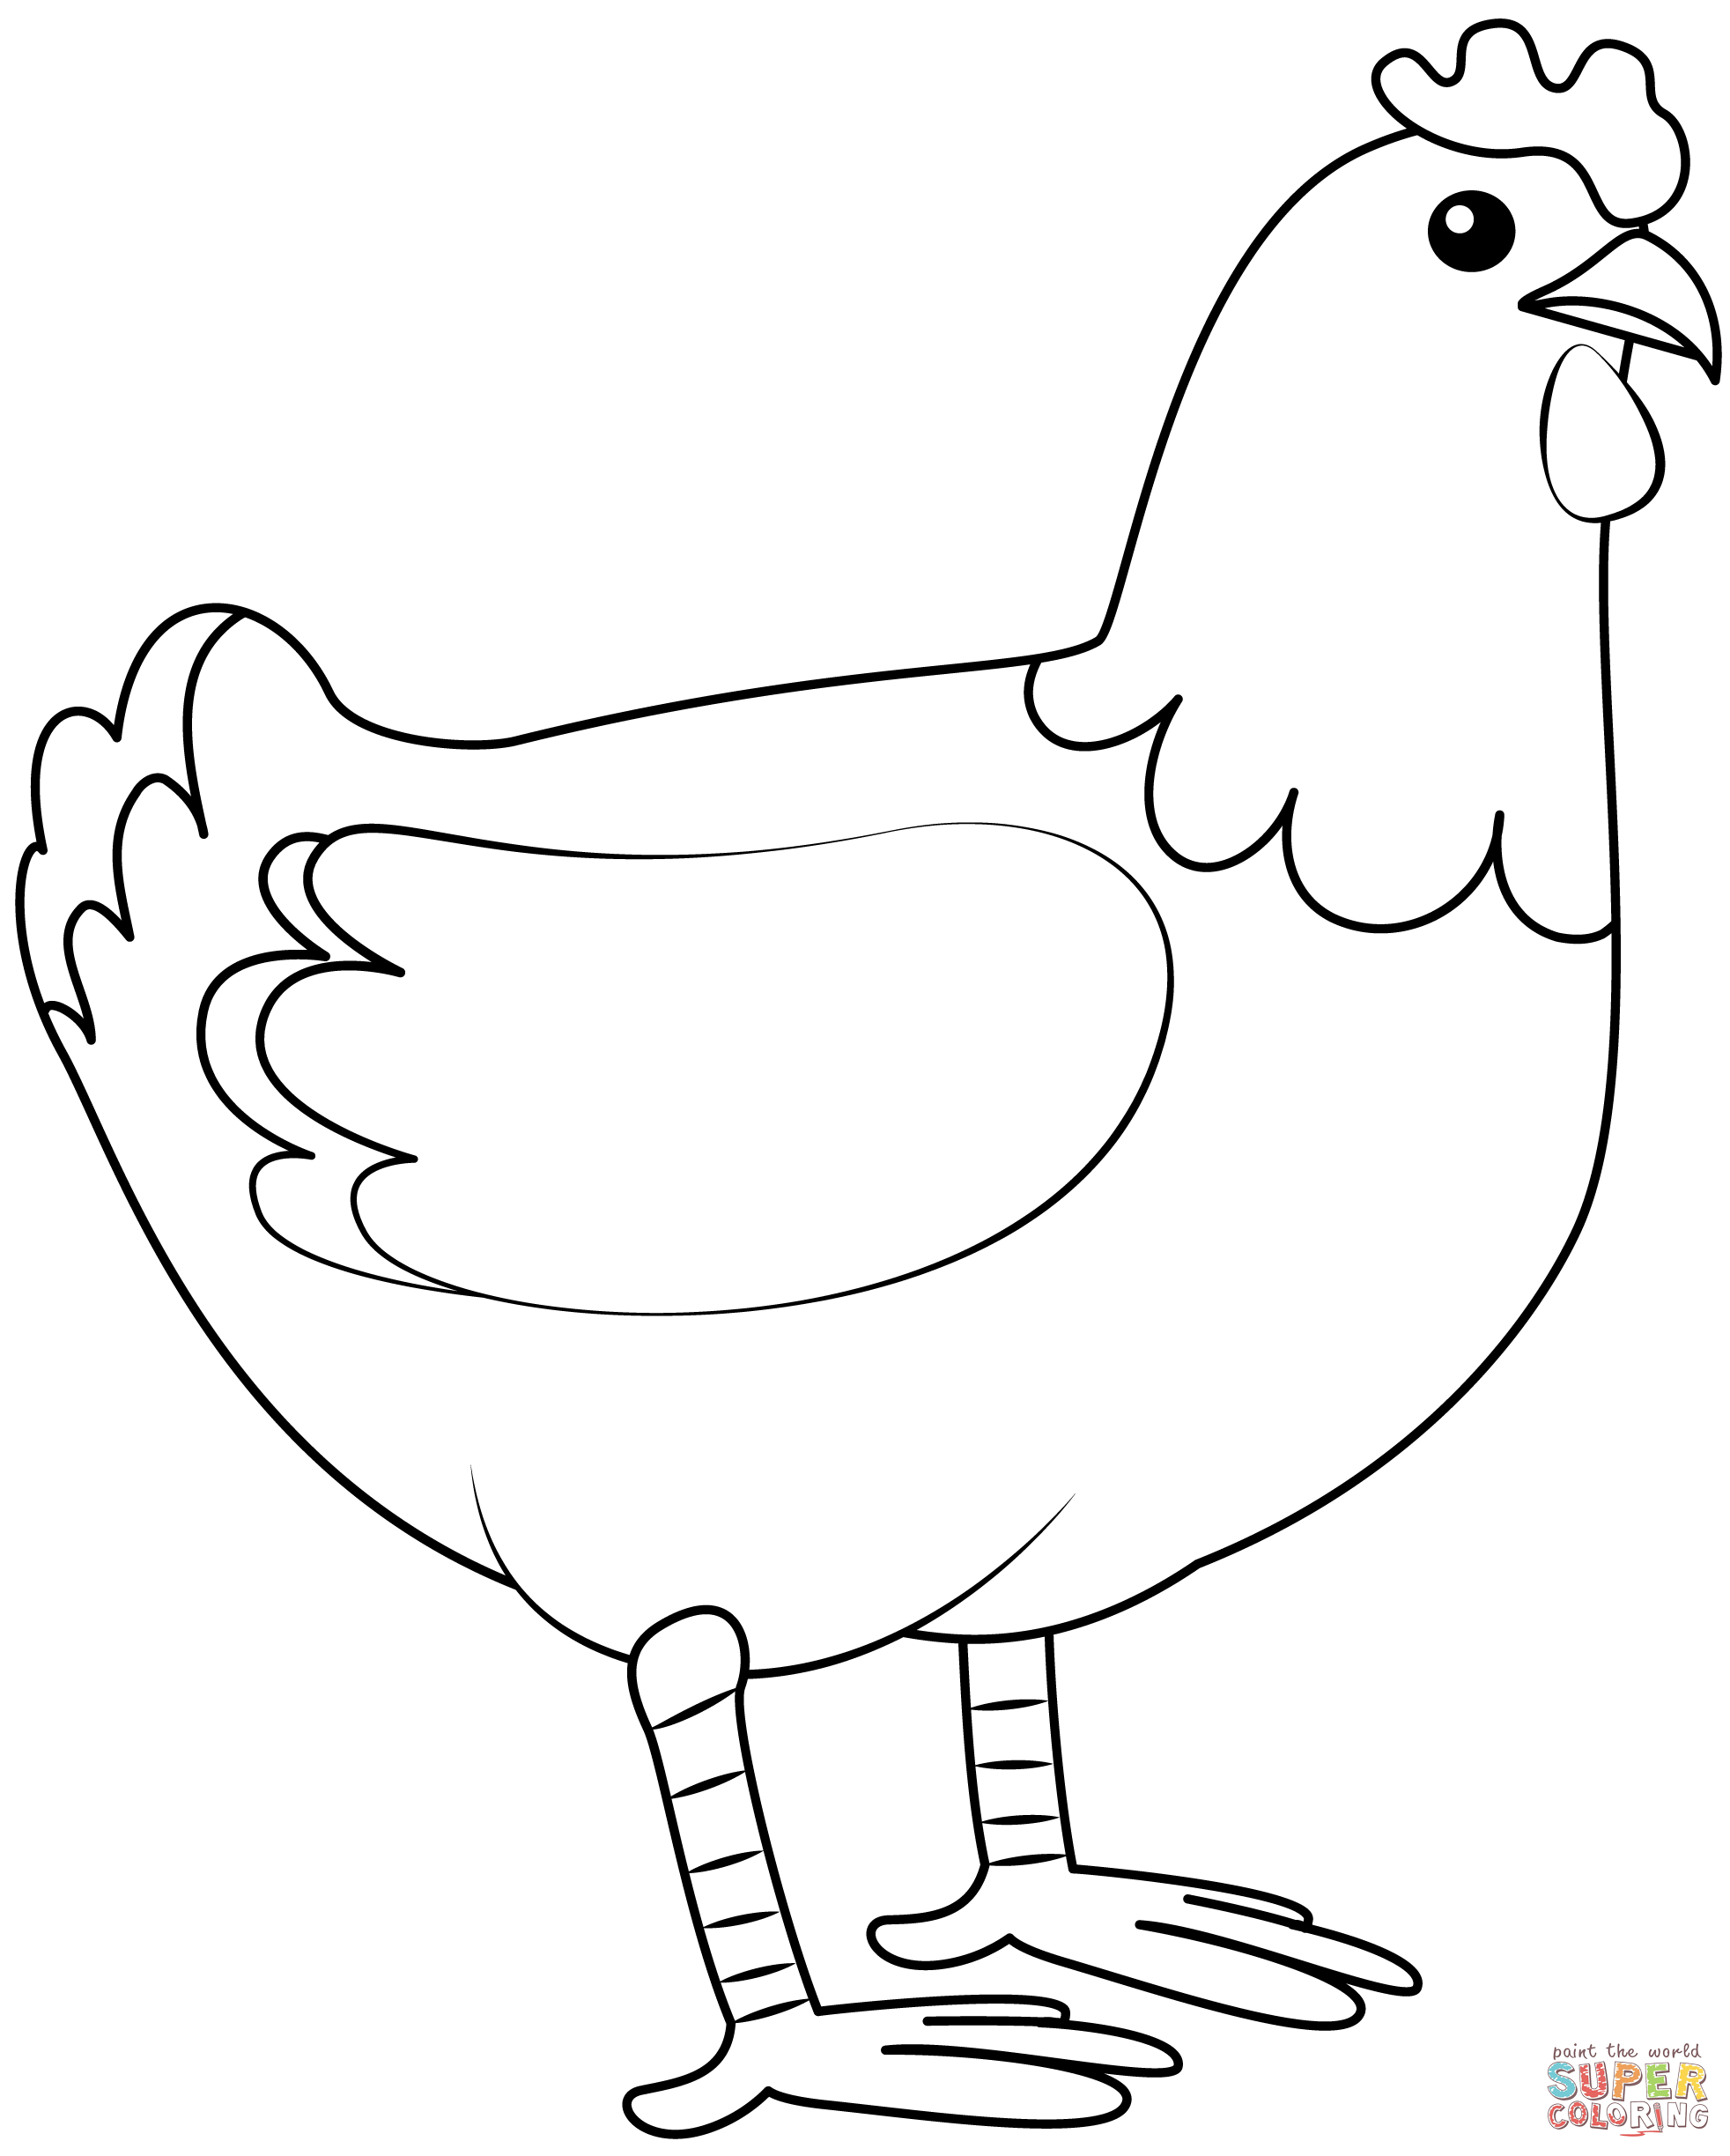 Chicken coloring page free printable coloring pages